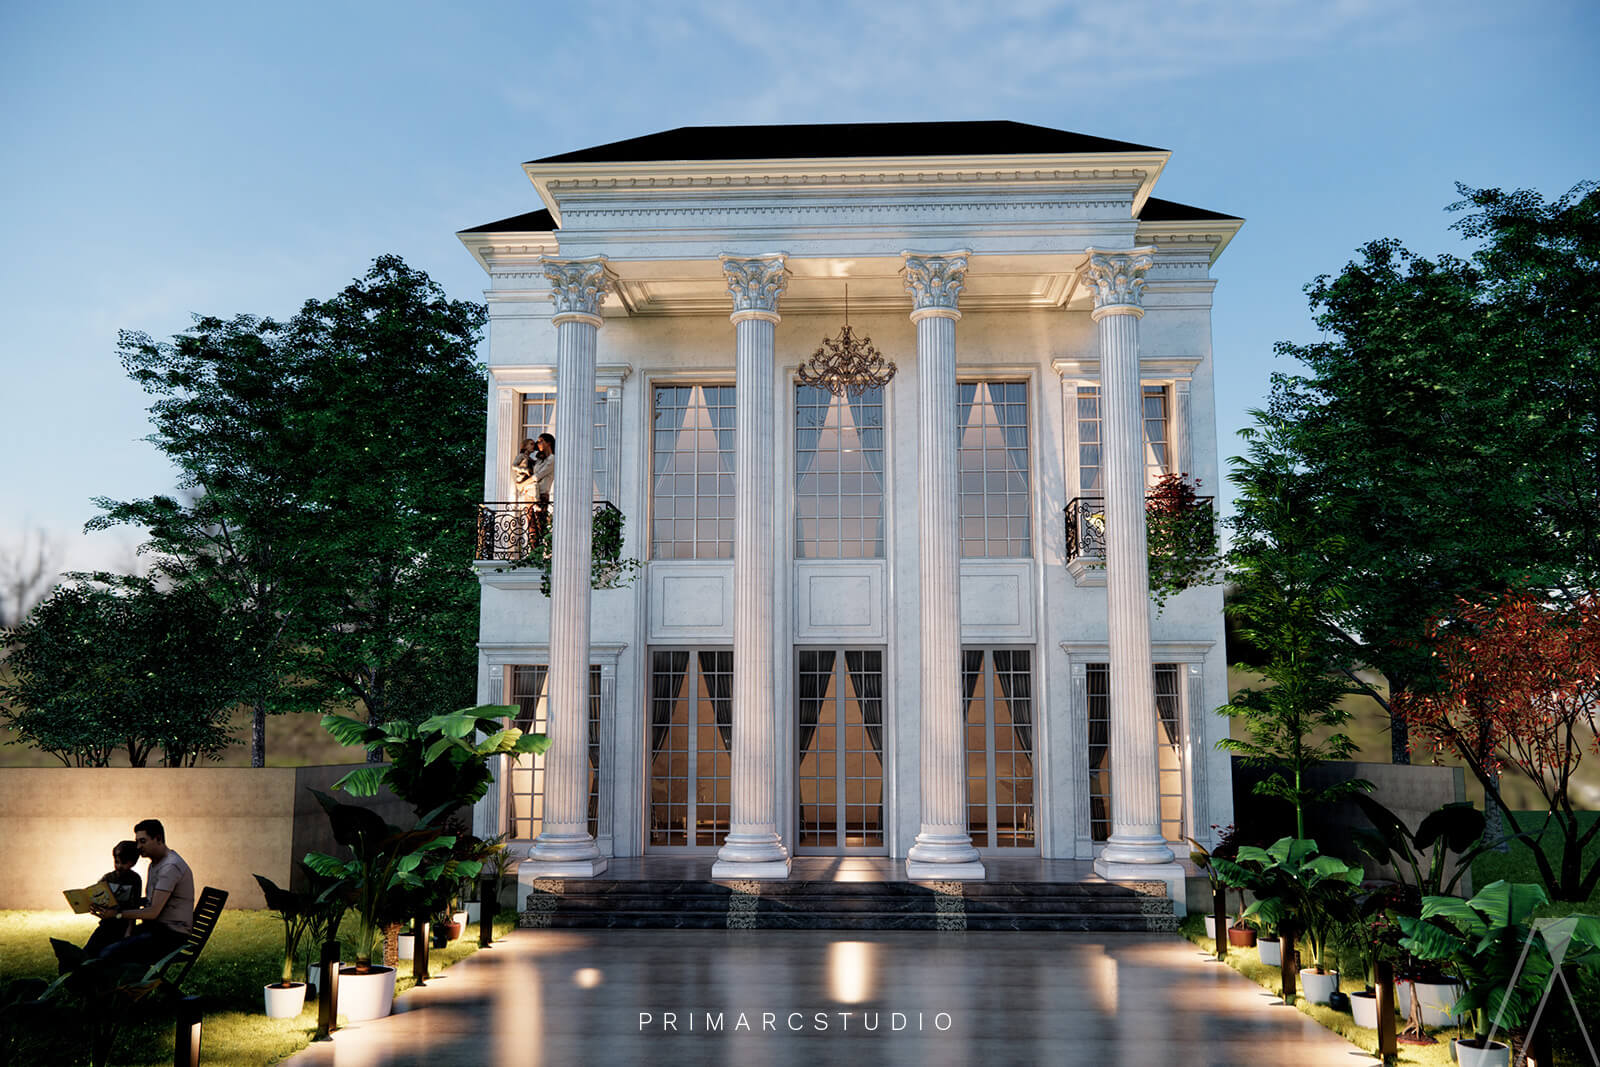 Classic Roman architecture featuring iconic columns and intricate detailing